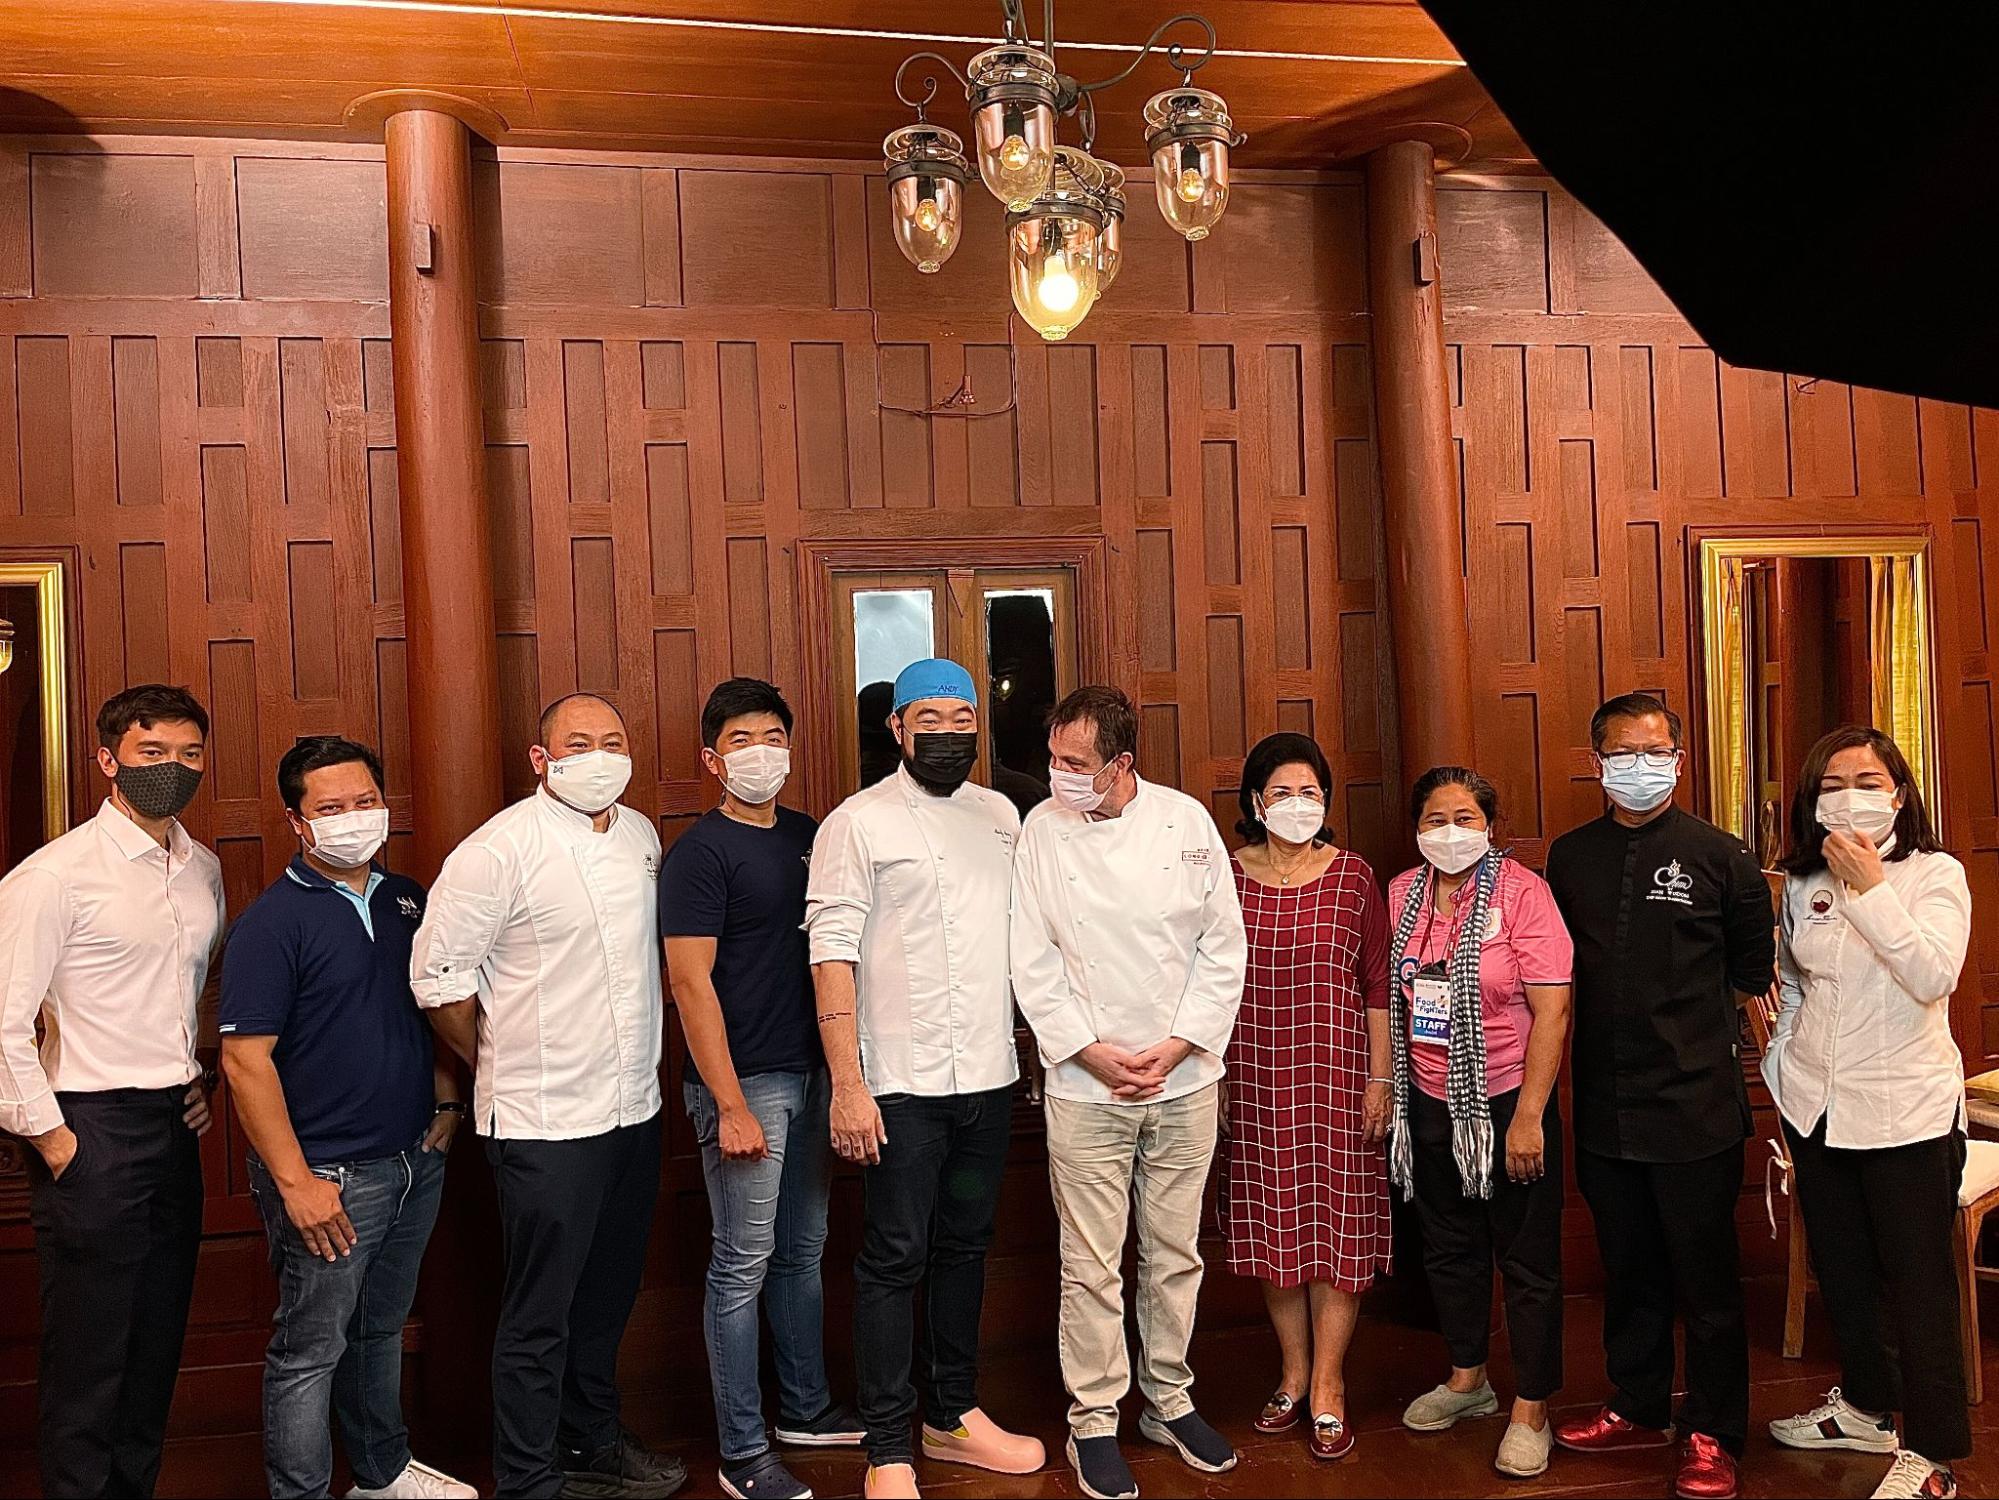 Frontliners Get Free Michelin Star Meals By Dedicated Chefs In “Food For Fighters” Project